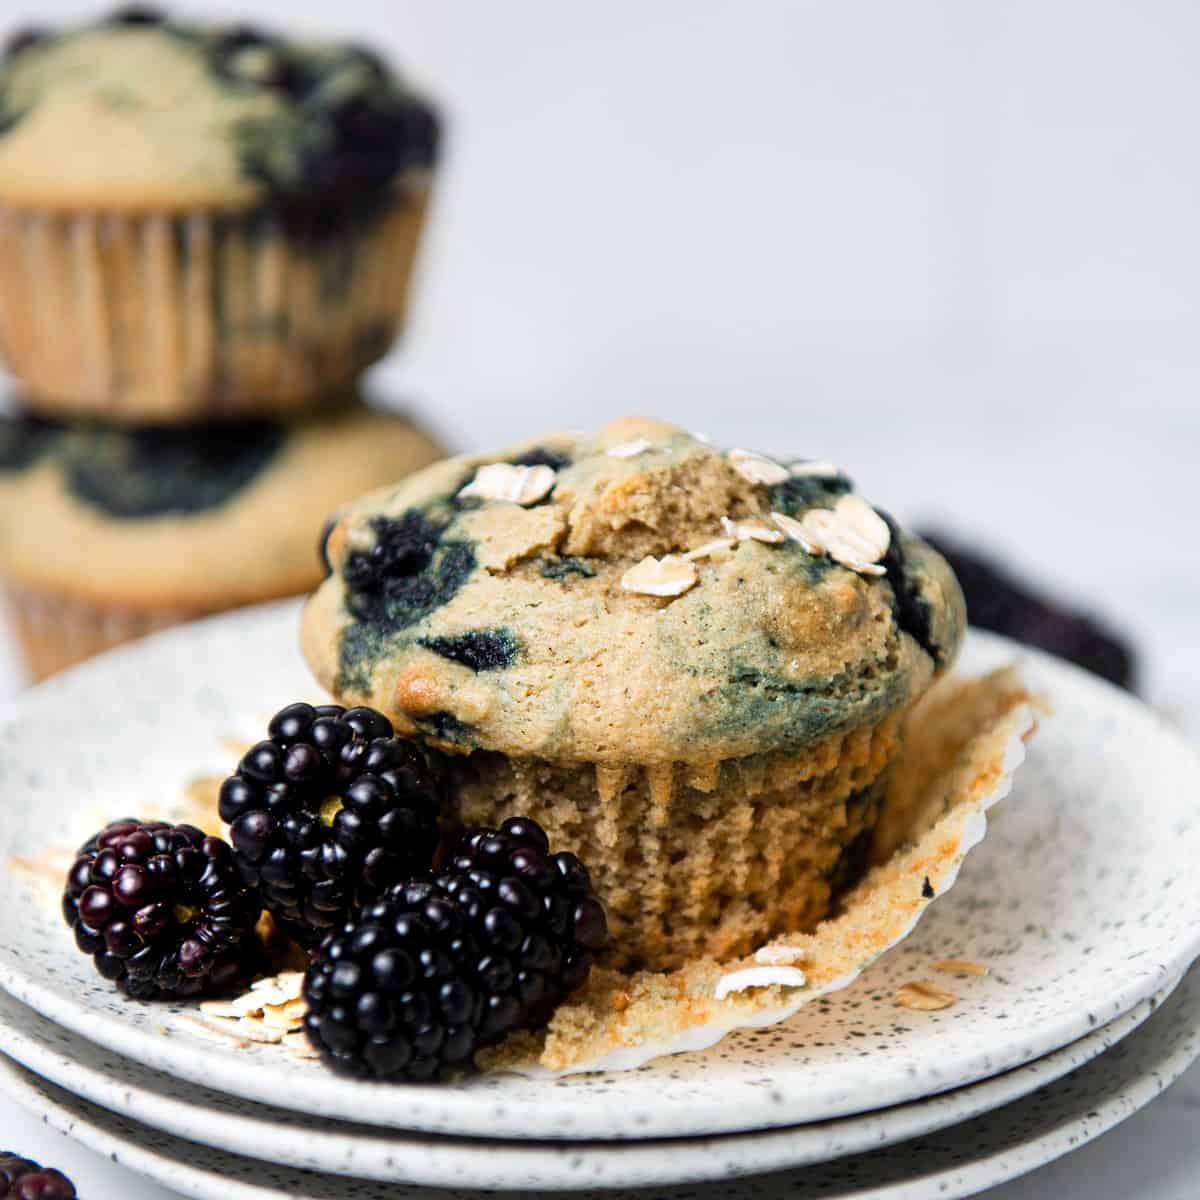 Blackberry muffin on a plate with decorative blackberries.